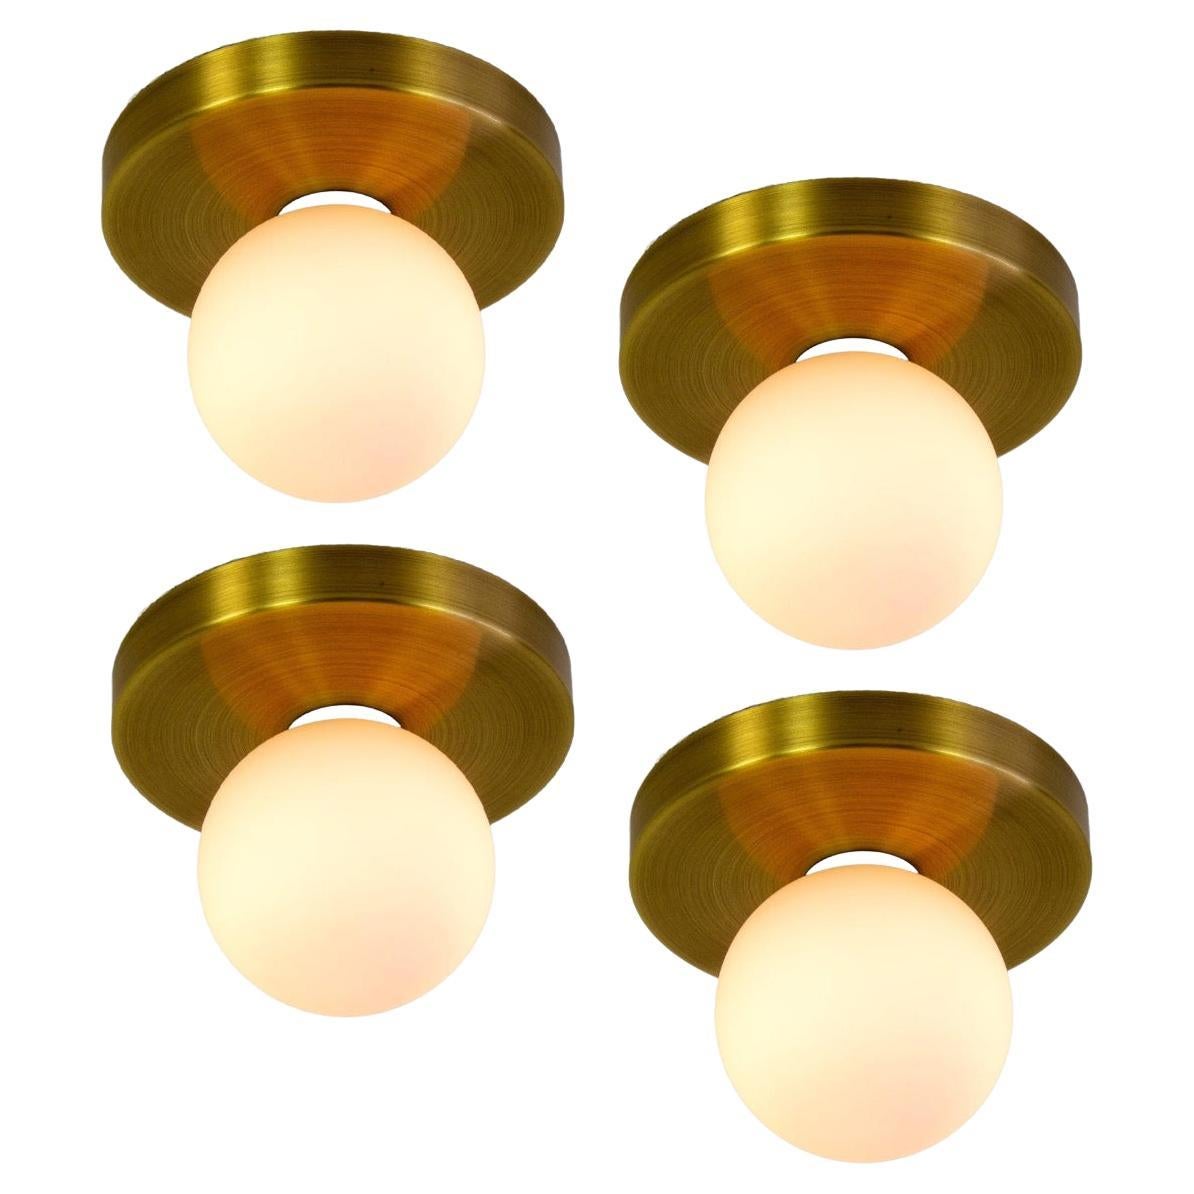 Set of 4 Globe Flush Mounts by Research.Lighting, Brushed Brass, Made to Order For Sale